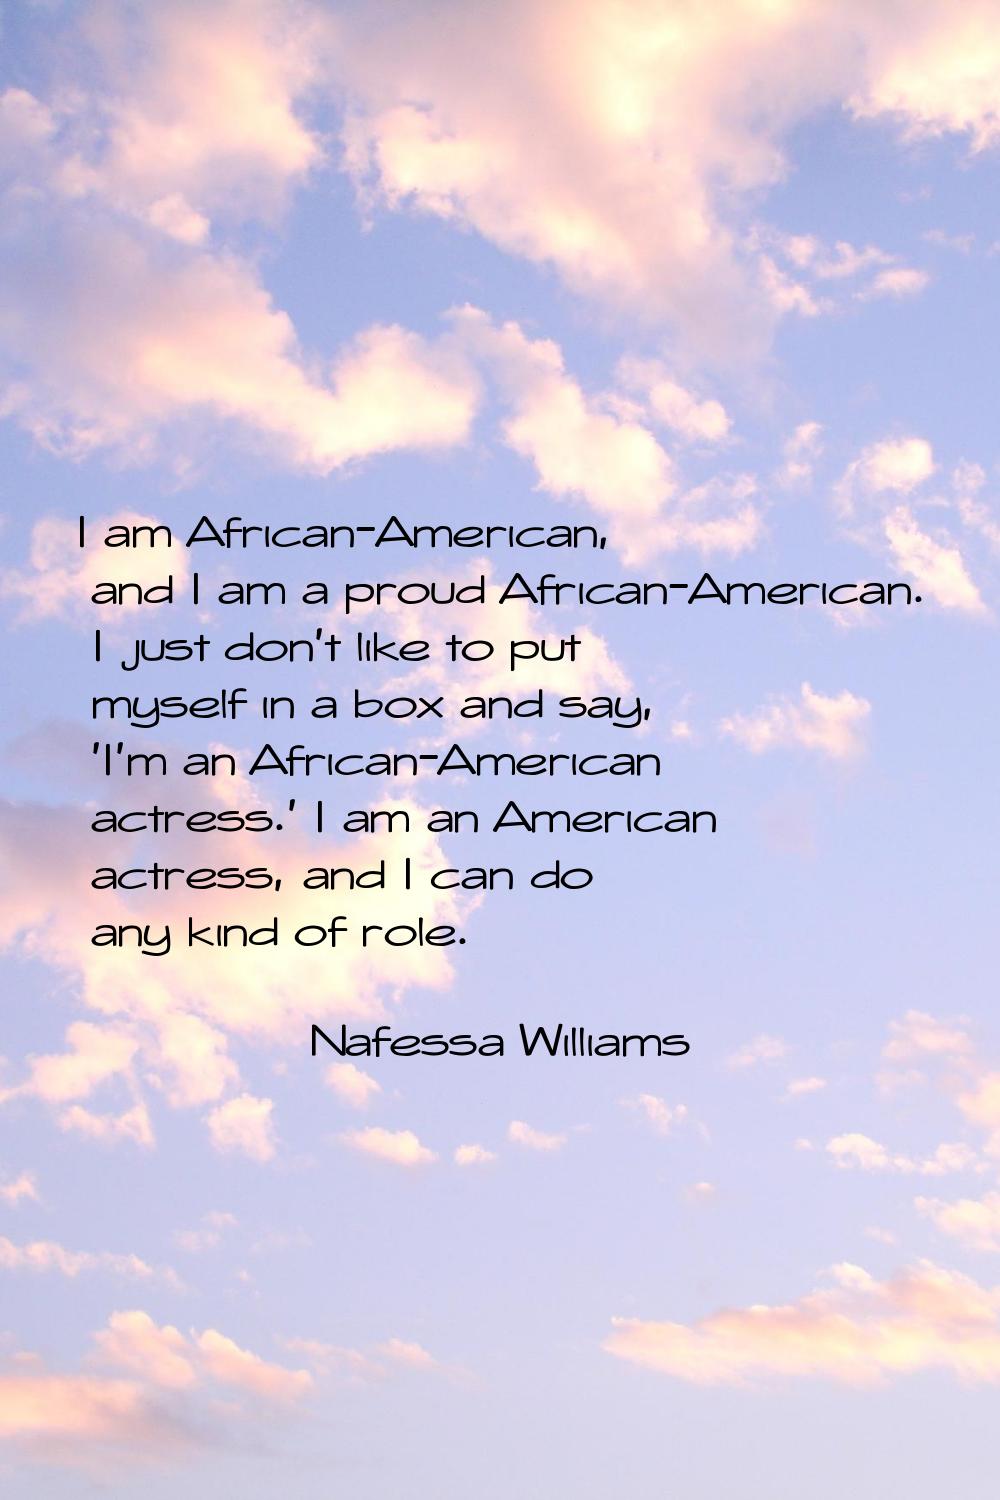 I am African-American, and I am a proud African-American. I just don't like to put myself in a box 